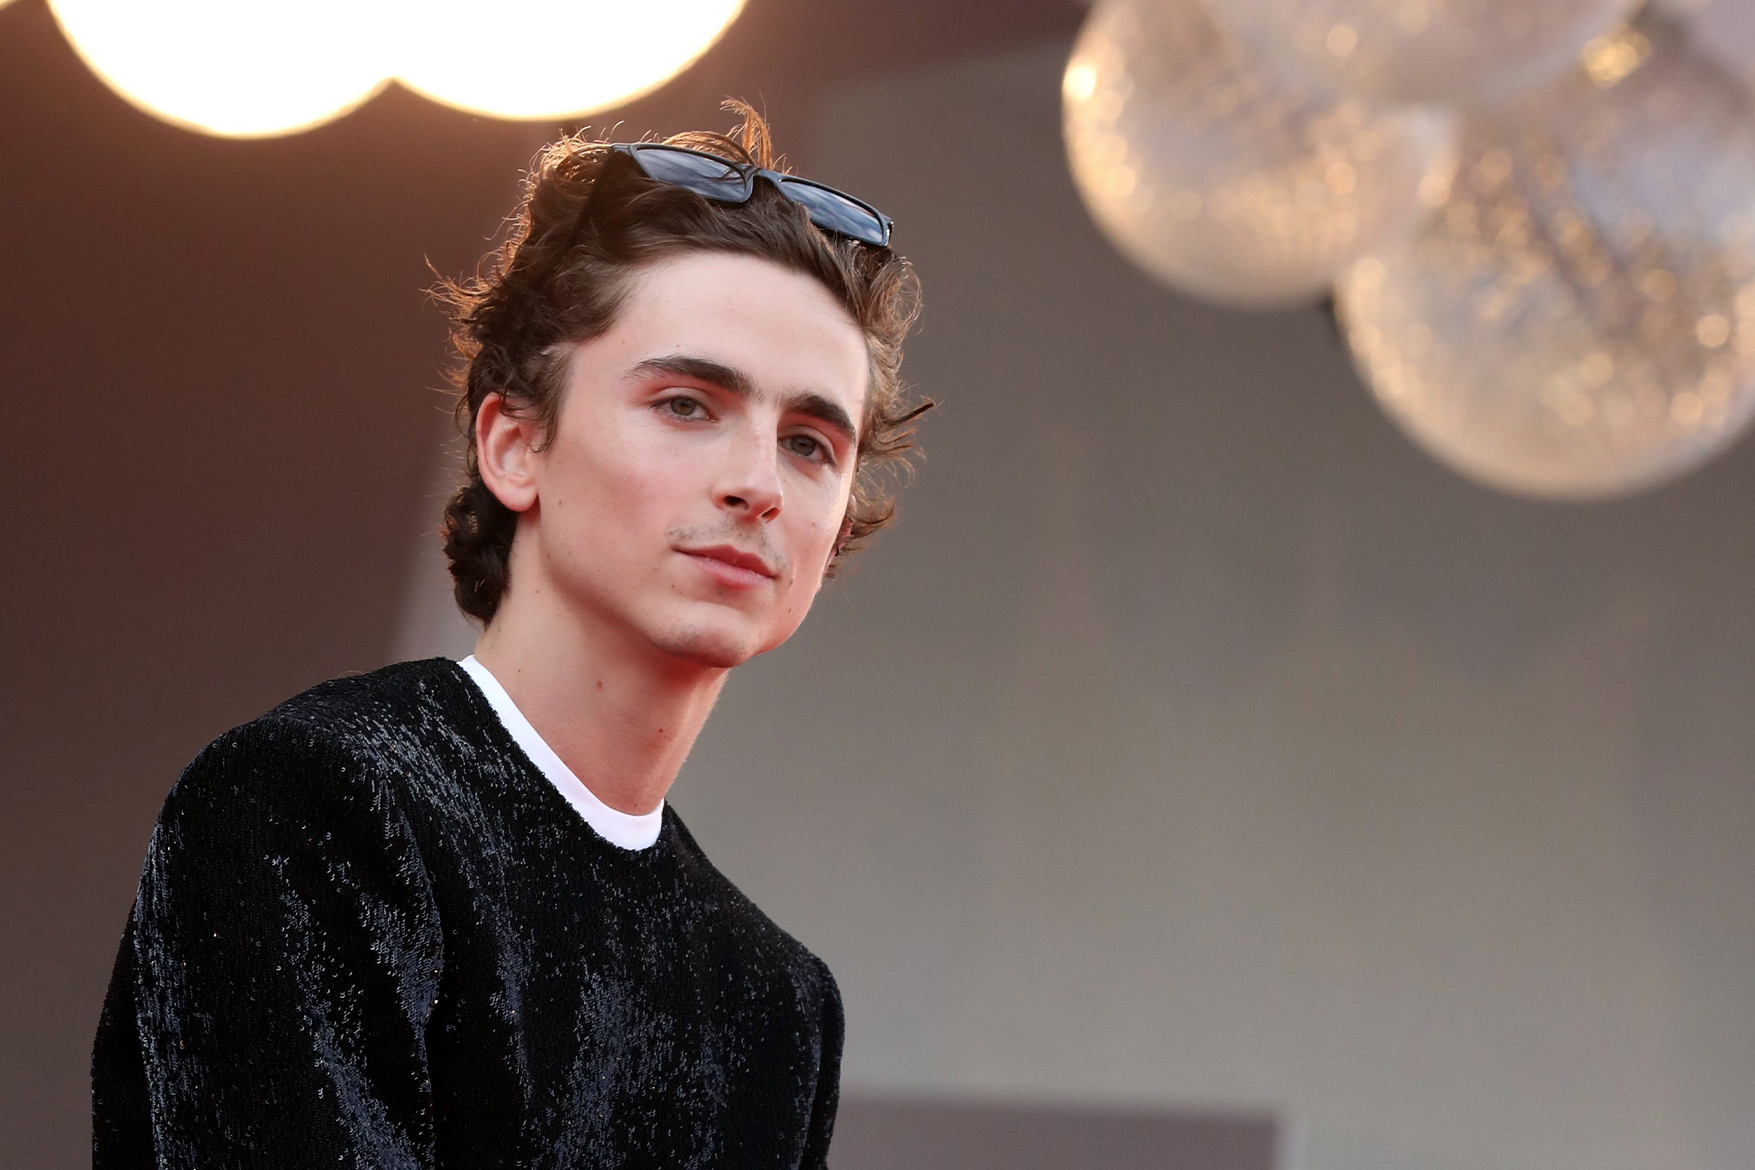 Timothée-Chalamet-is-now-an-official-friend-of-Cartier-01